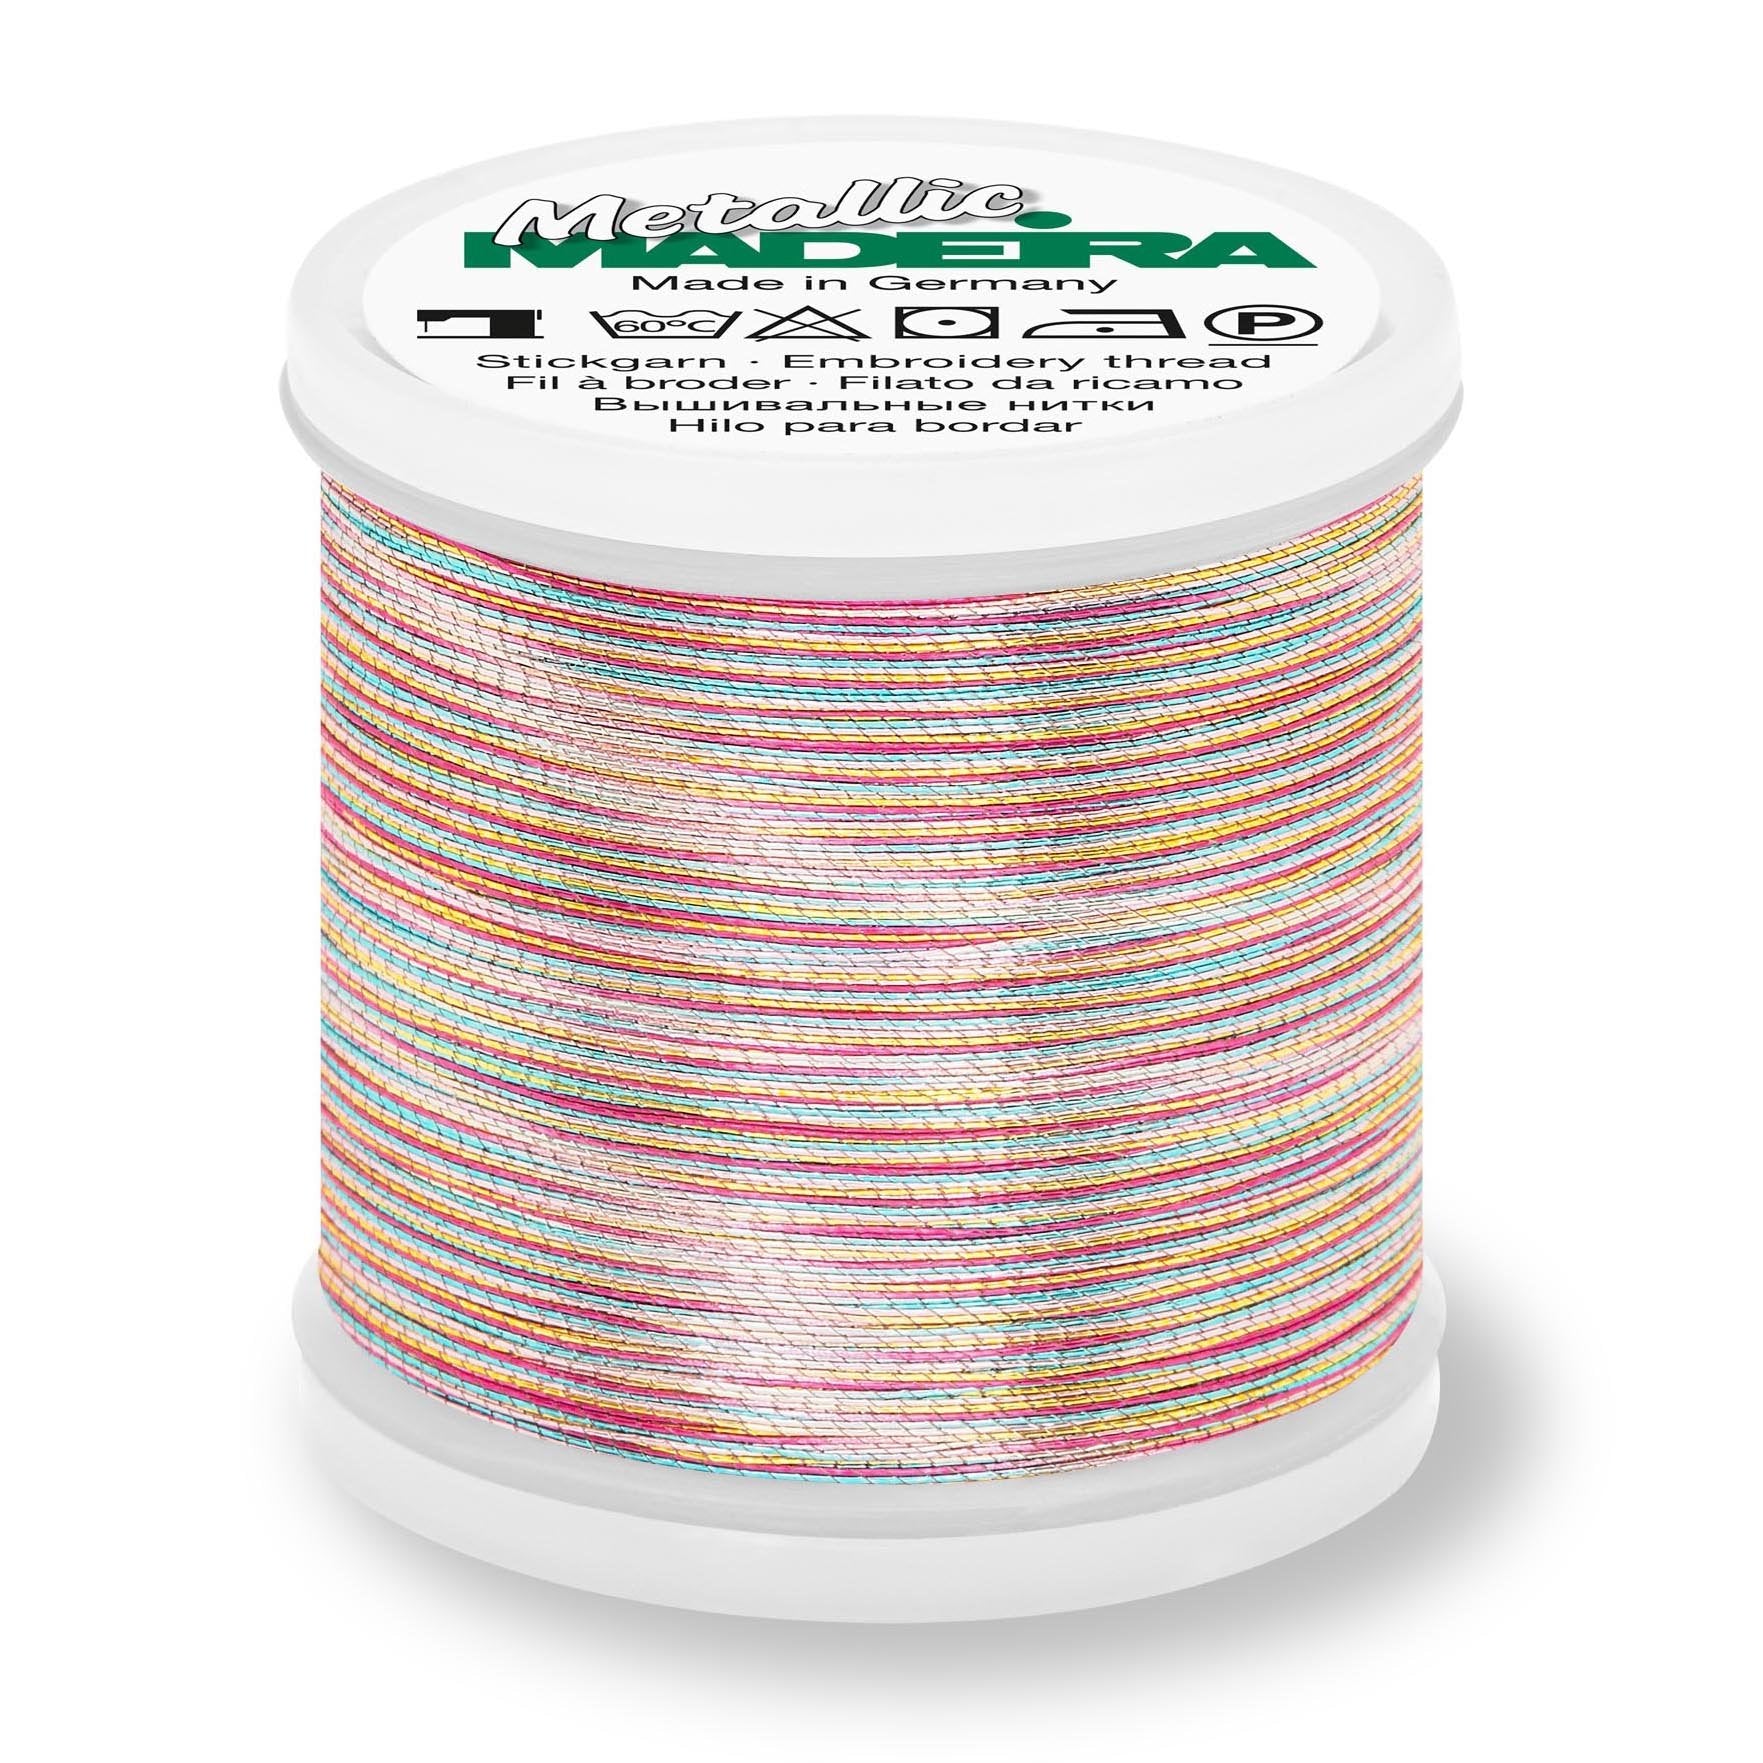 Tips and Tricks to Embroider with Metallic Thread – Wilcom Product Blog